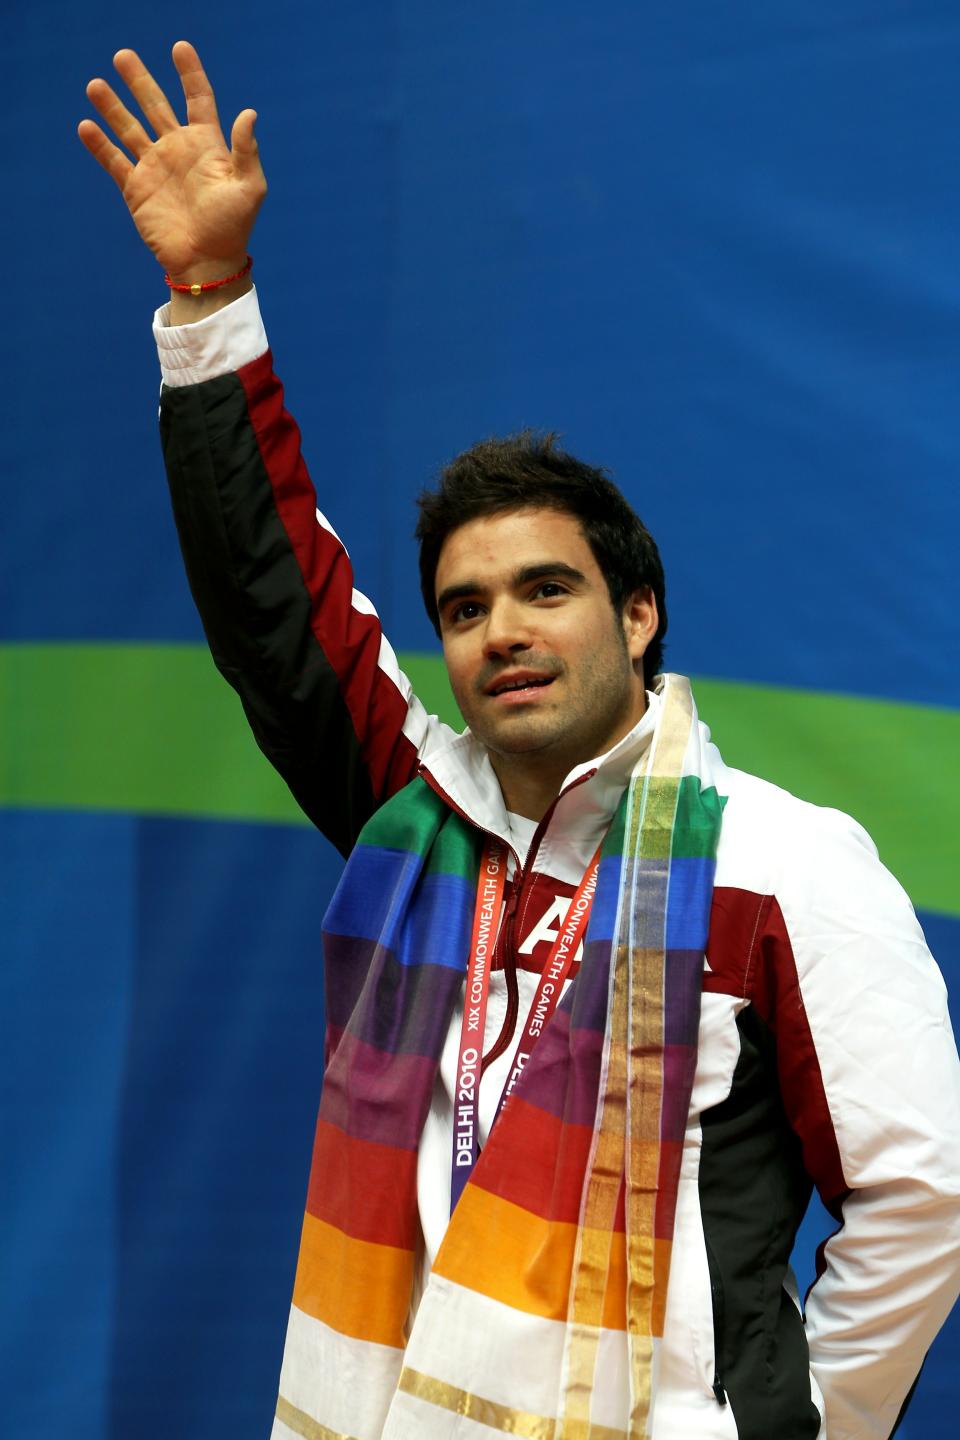 DELHI, INDIA - OCTOBER 11: Alexandre Despatie of Canada poses with the gold medal won in the Men's 3m Springboard Final at Dr. S.P. Mukherjee Aquatics Complex during day eight of the Delhi 2010 Commonwealth Games on October 11, 2010 in Delhi, India. (Photo by Phil Walter/Getty Images)